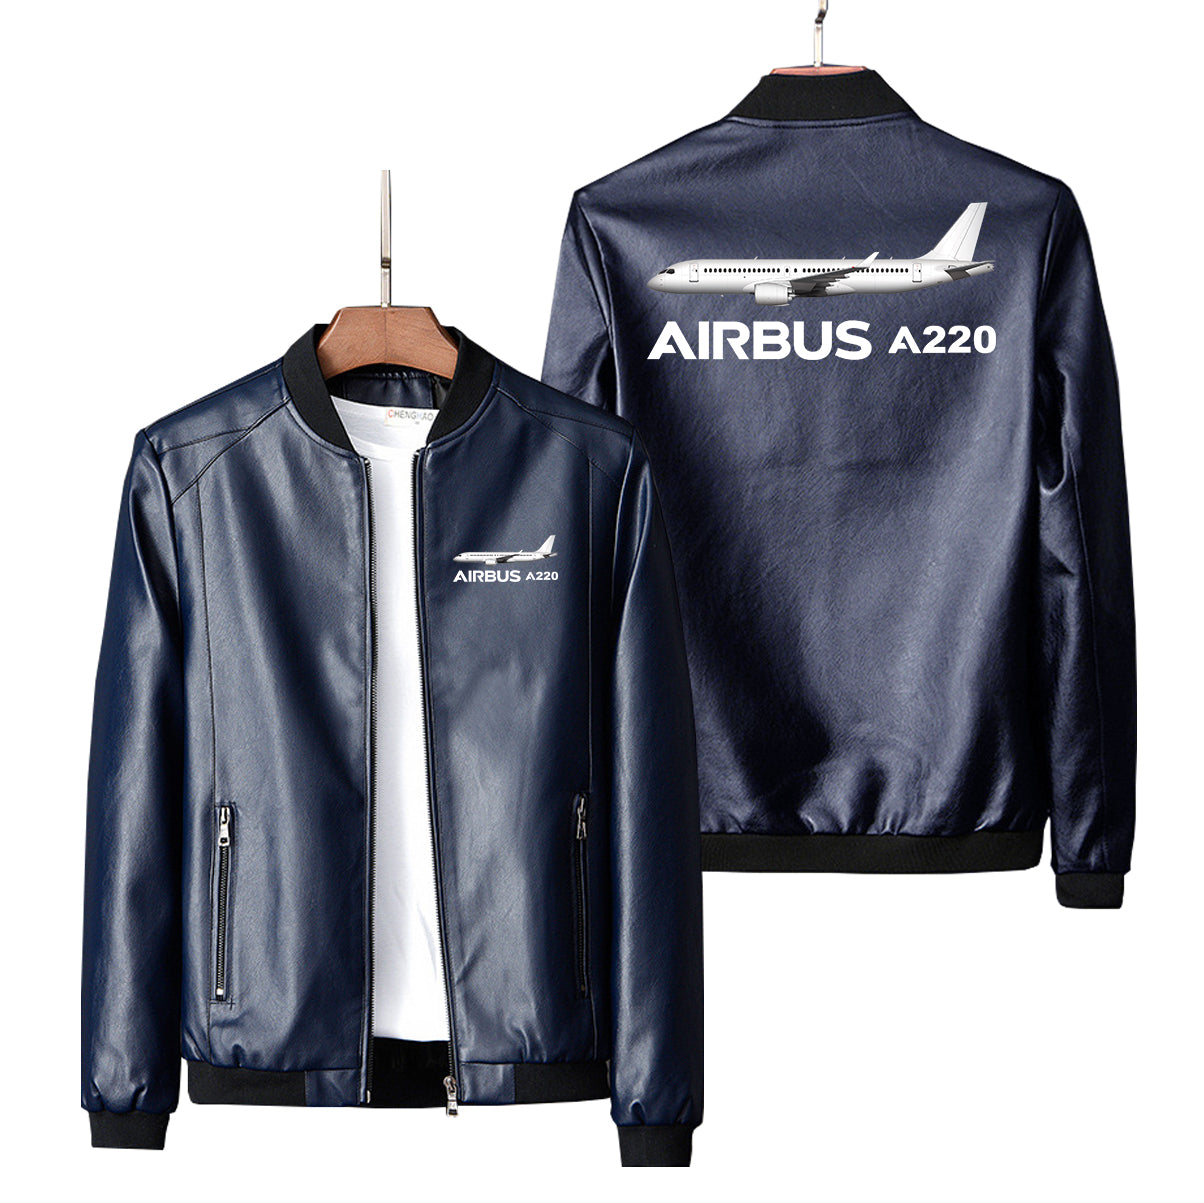 The Airbus A220 Designed PU Leather Jackets